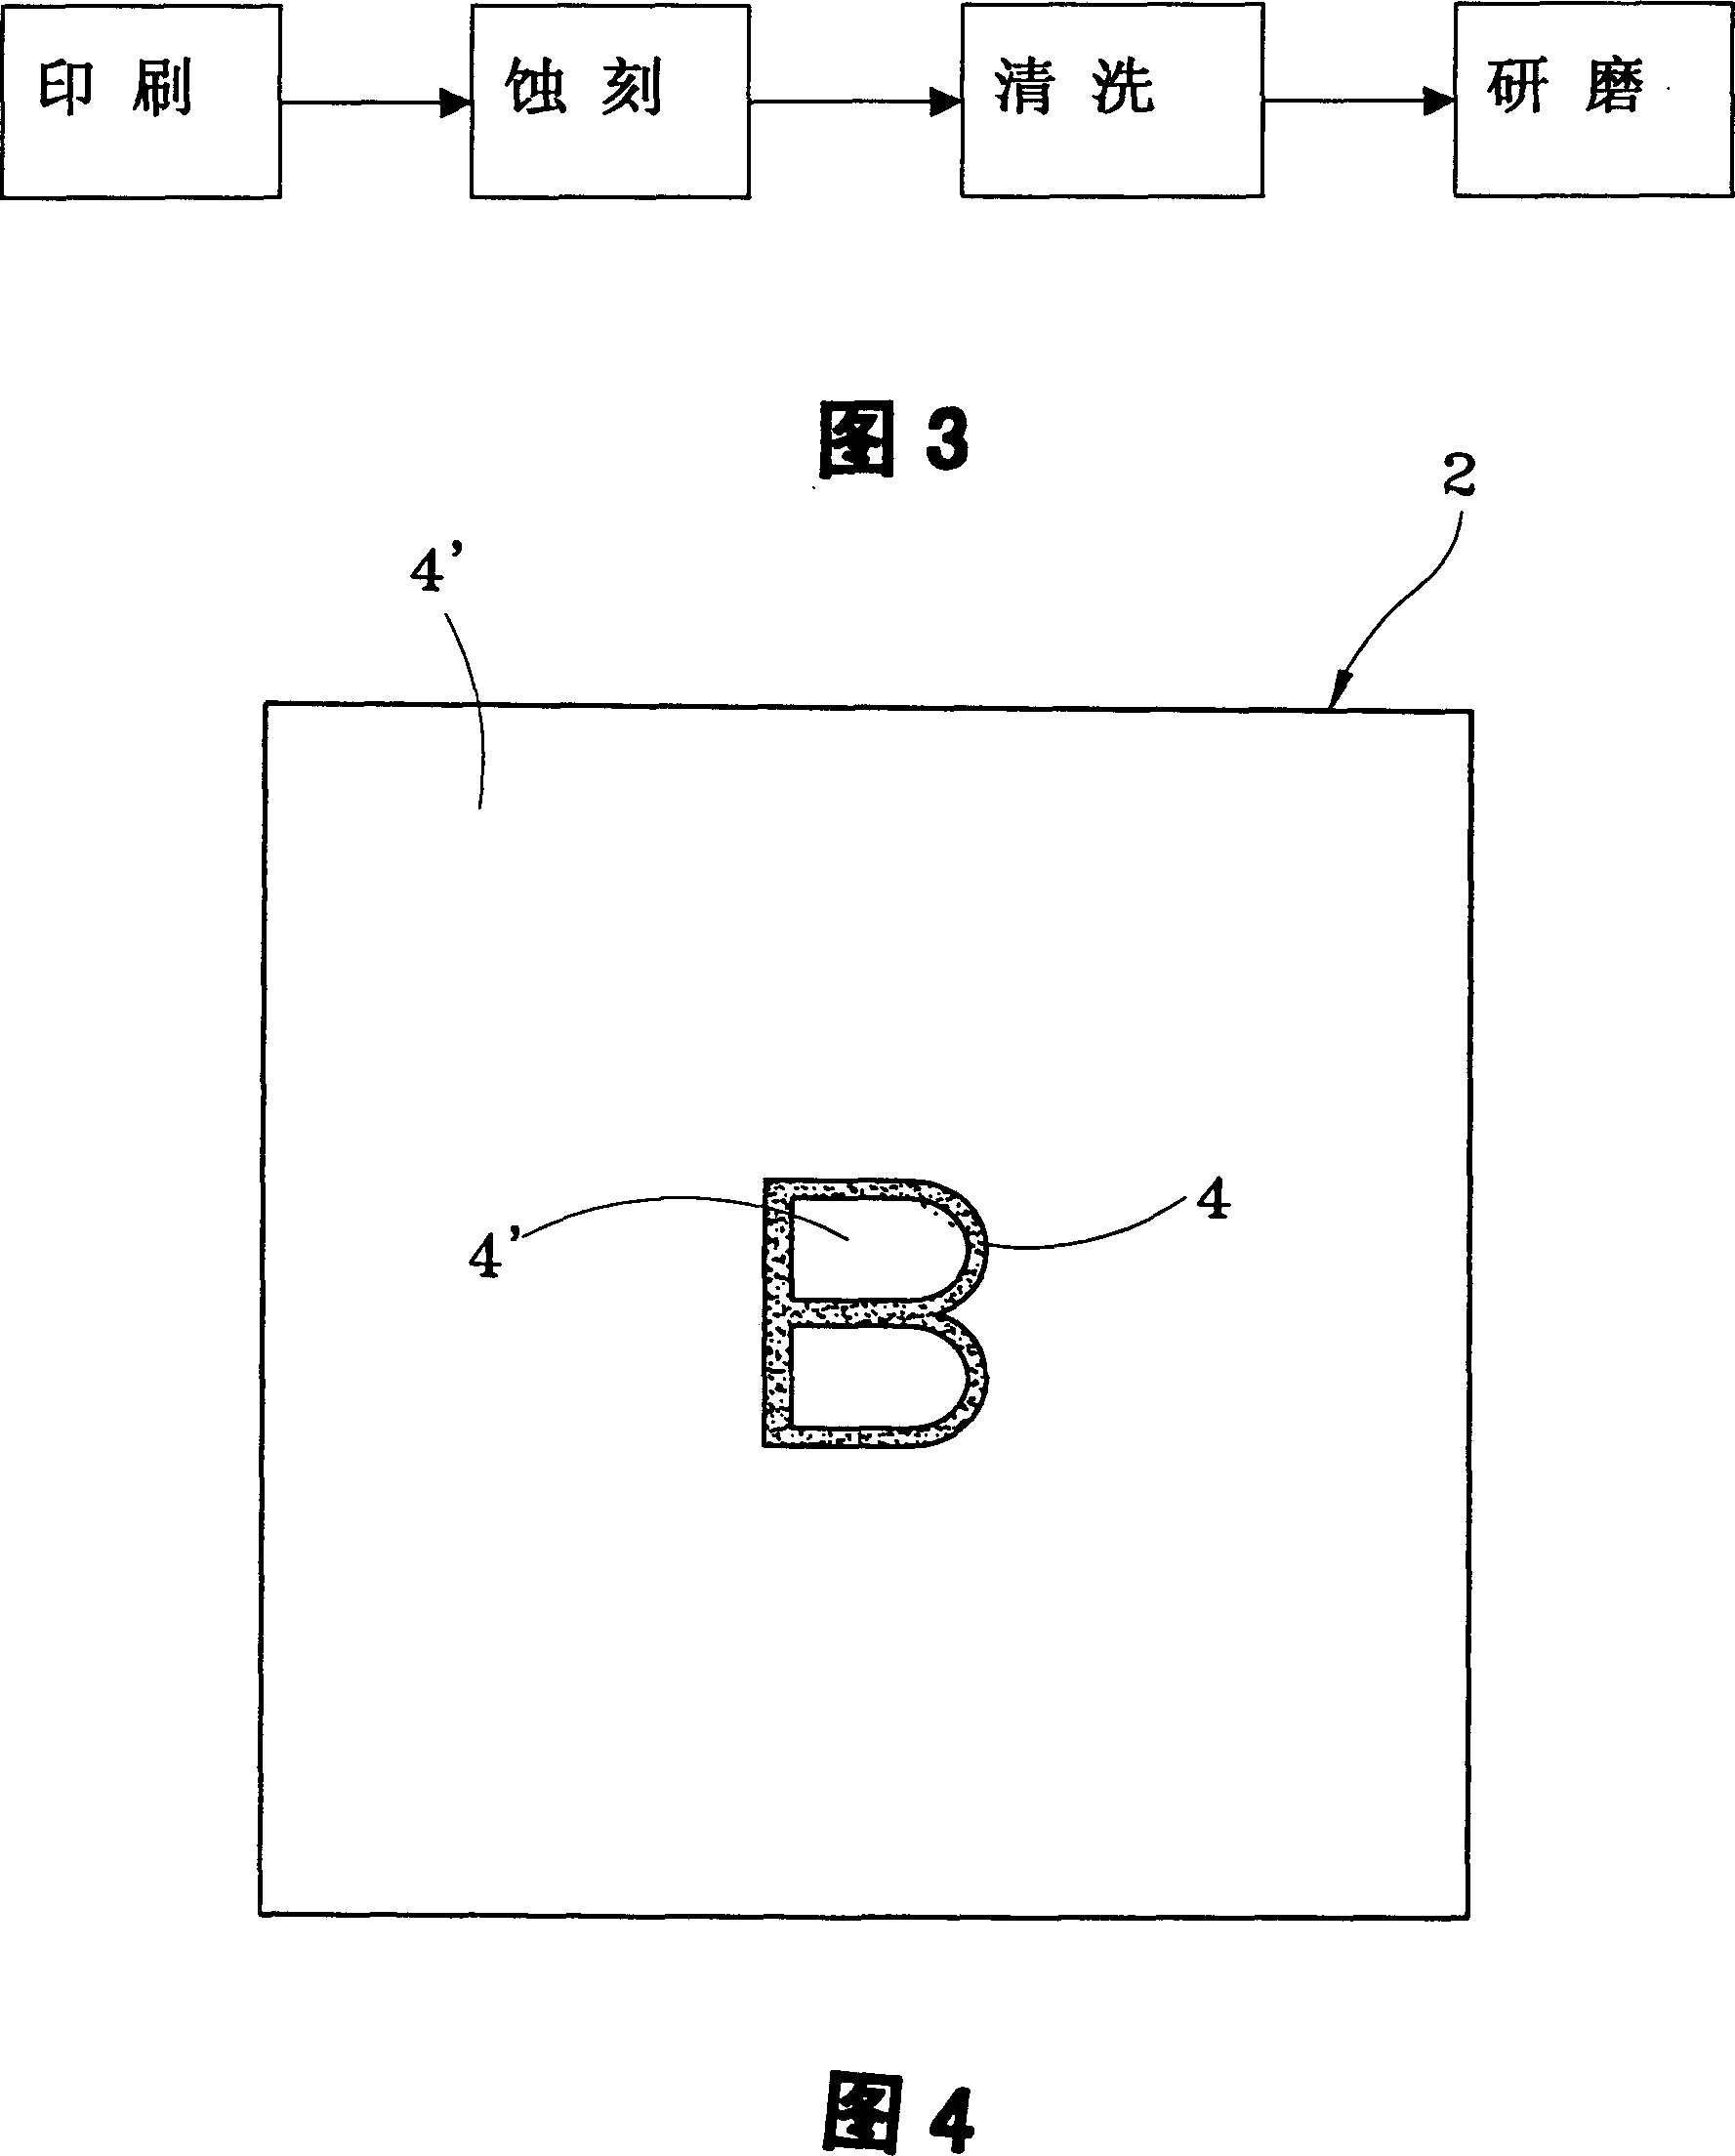 Method for producing cutter